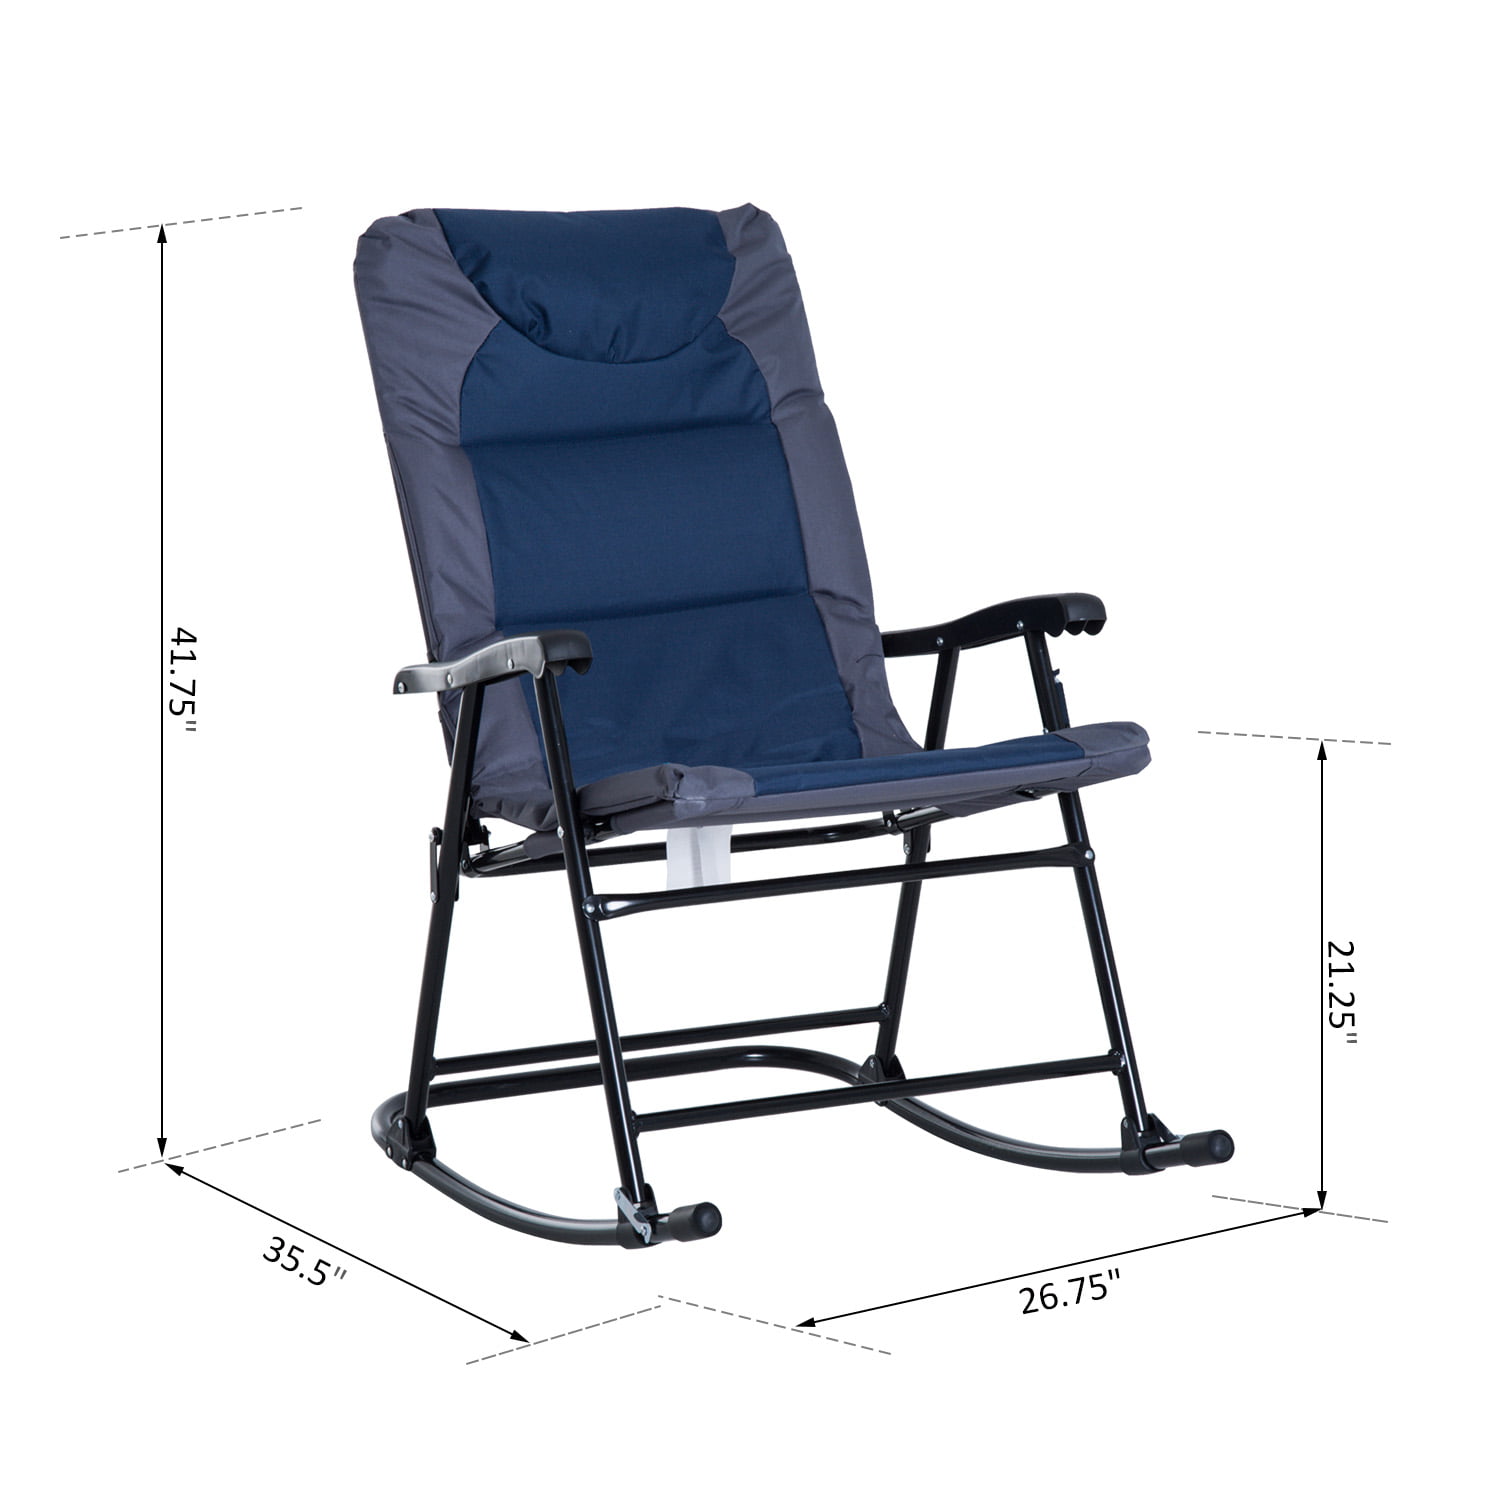 basics foldable rocking chair with canopy blue